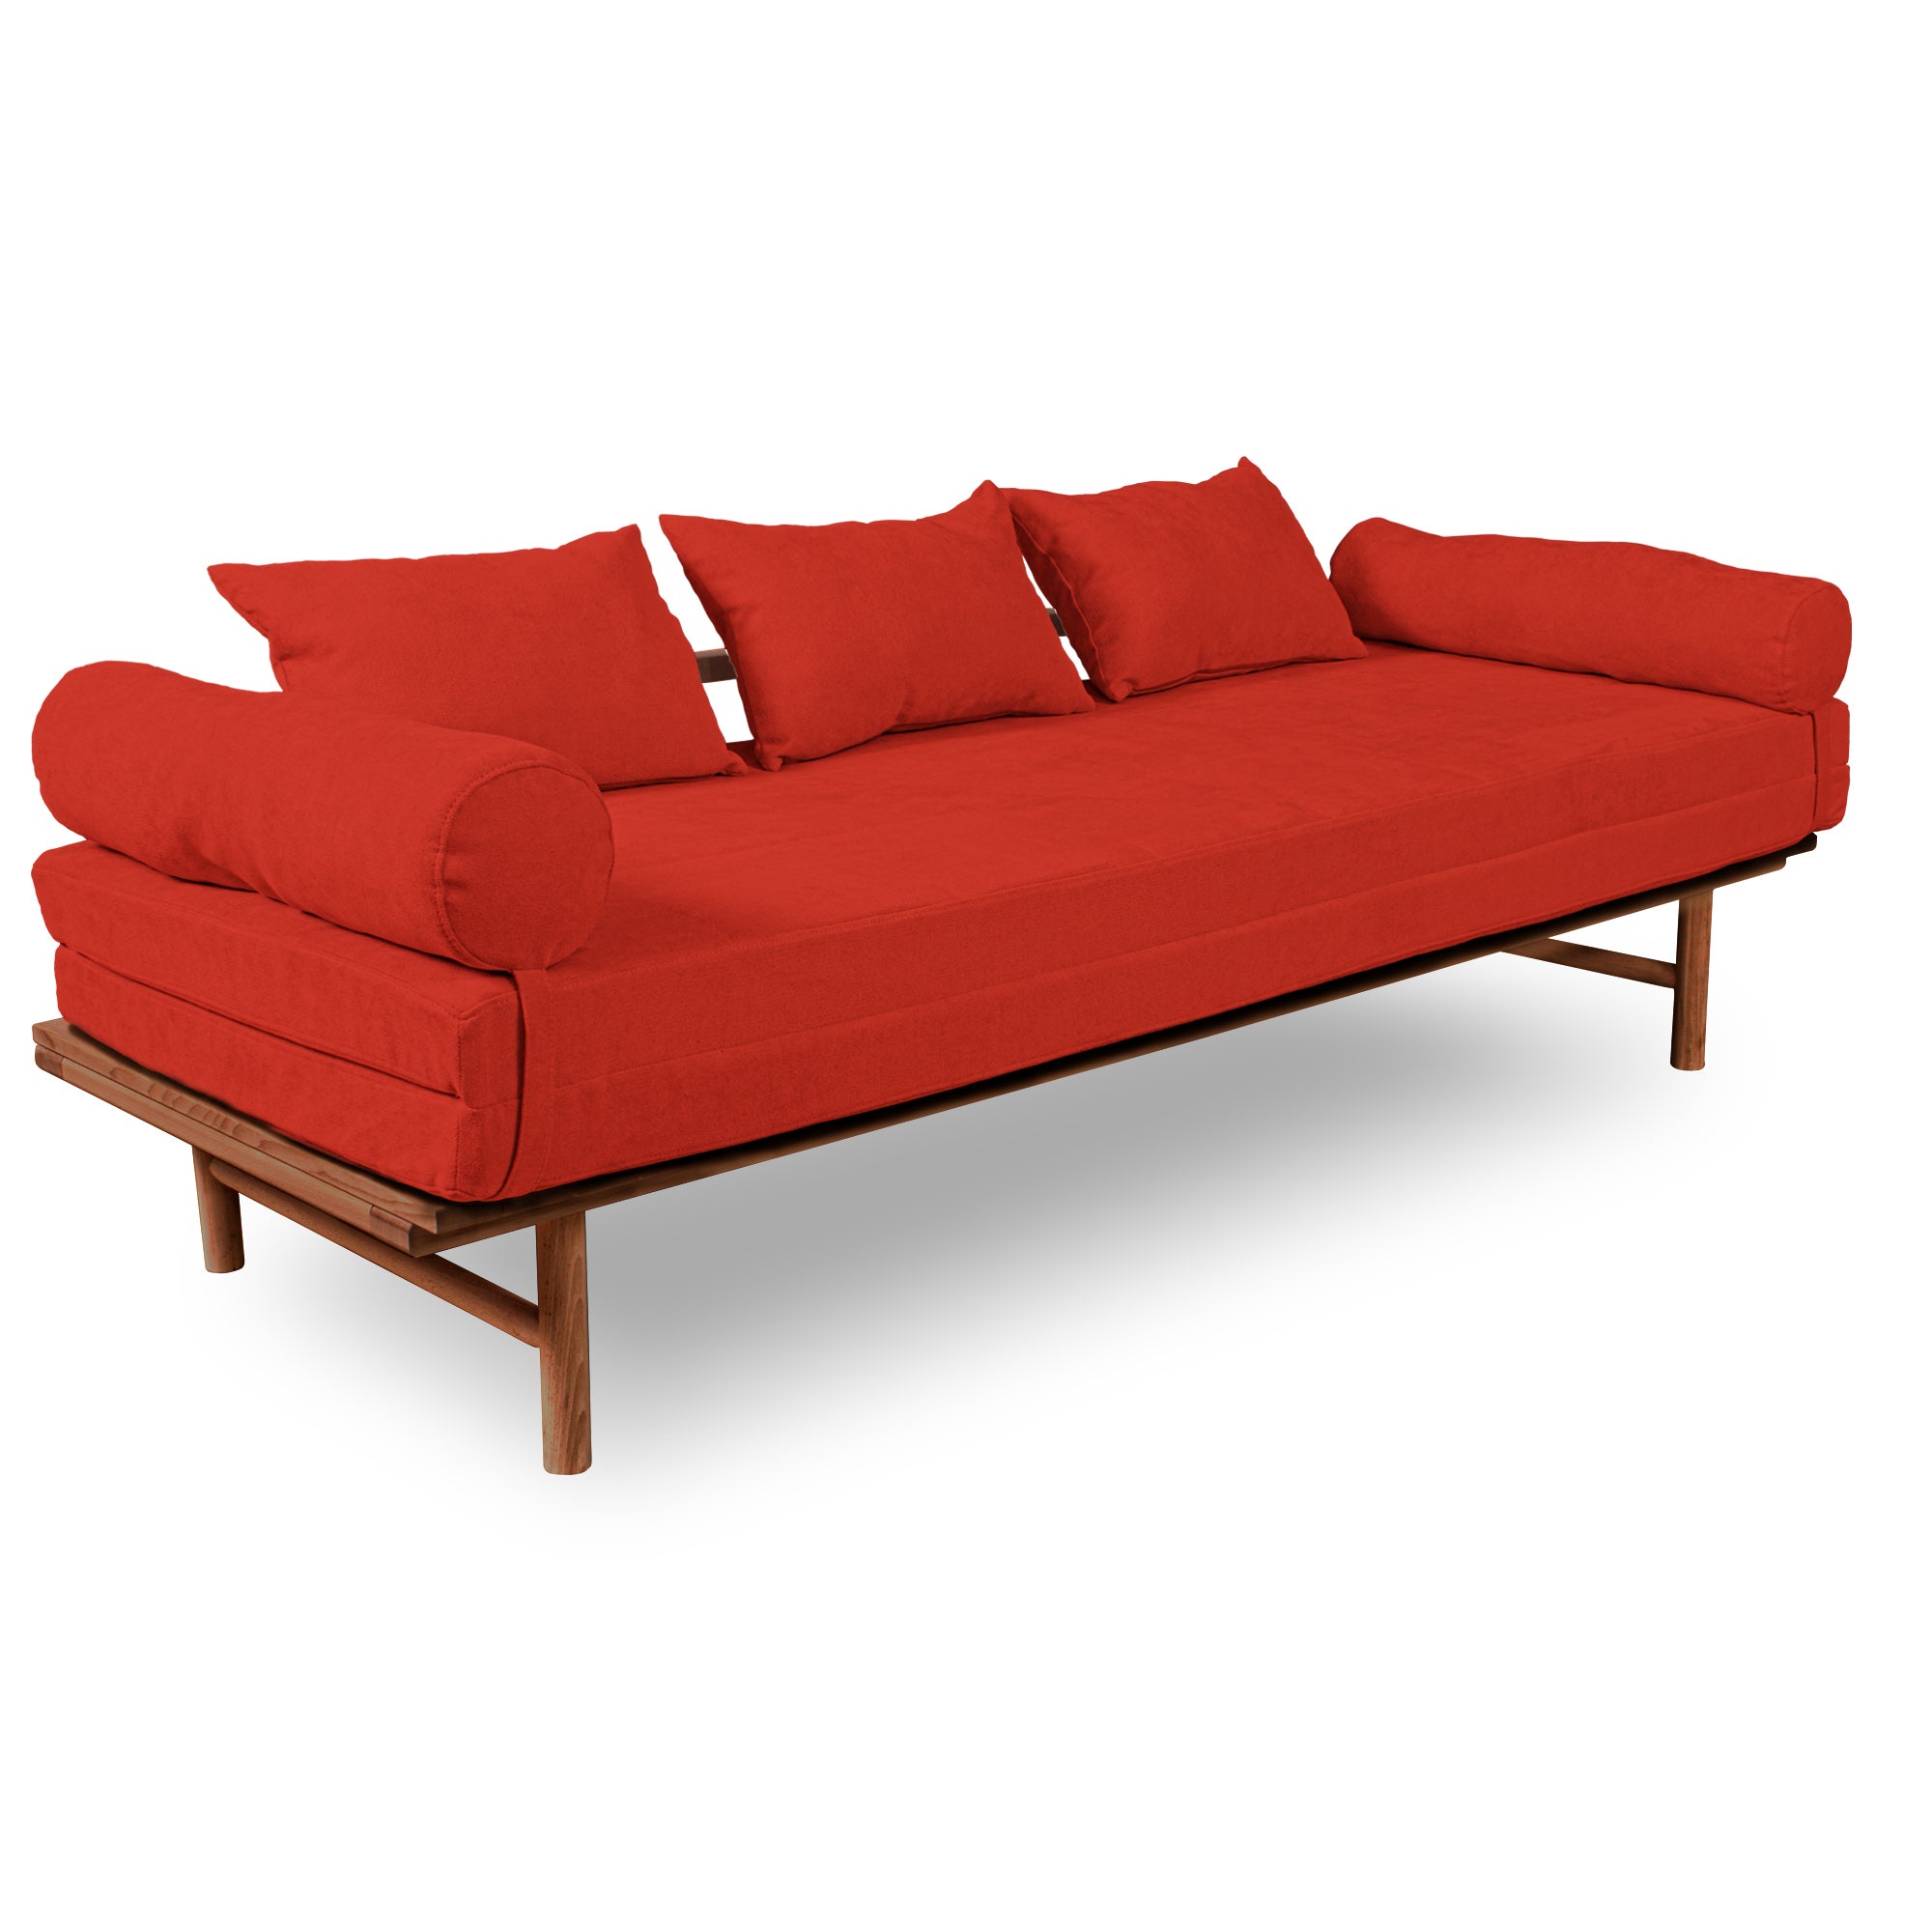 Le MAR Folding Daybed, Beech Wood Frame, Caramel Colour-red upholstery